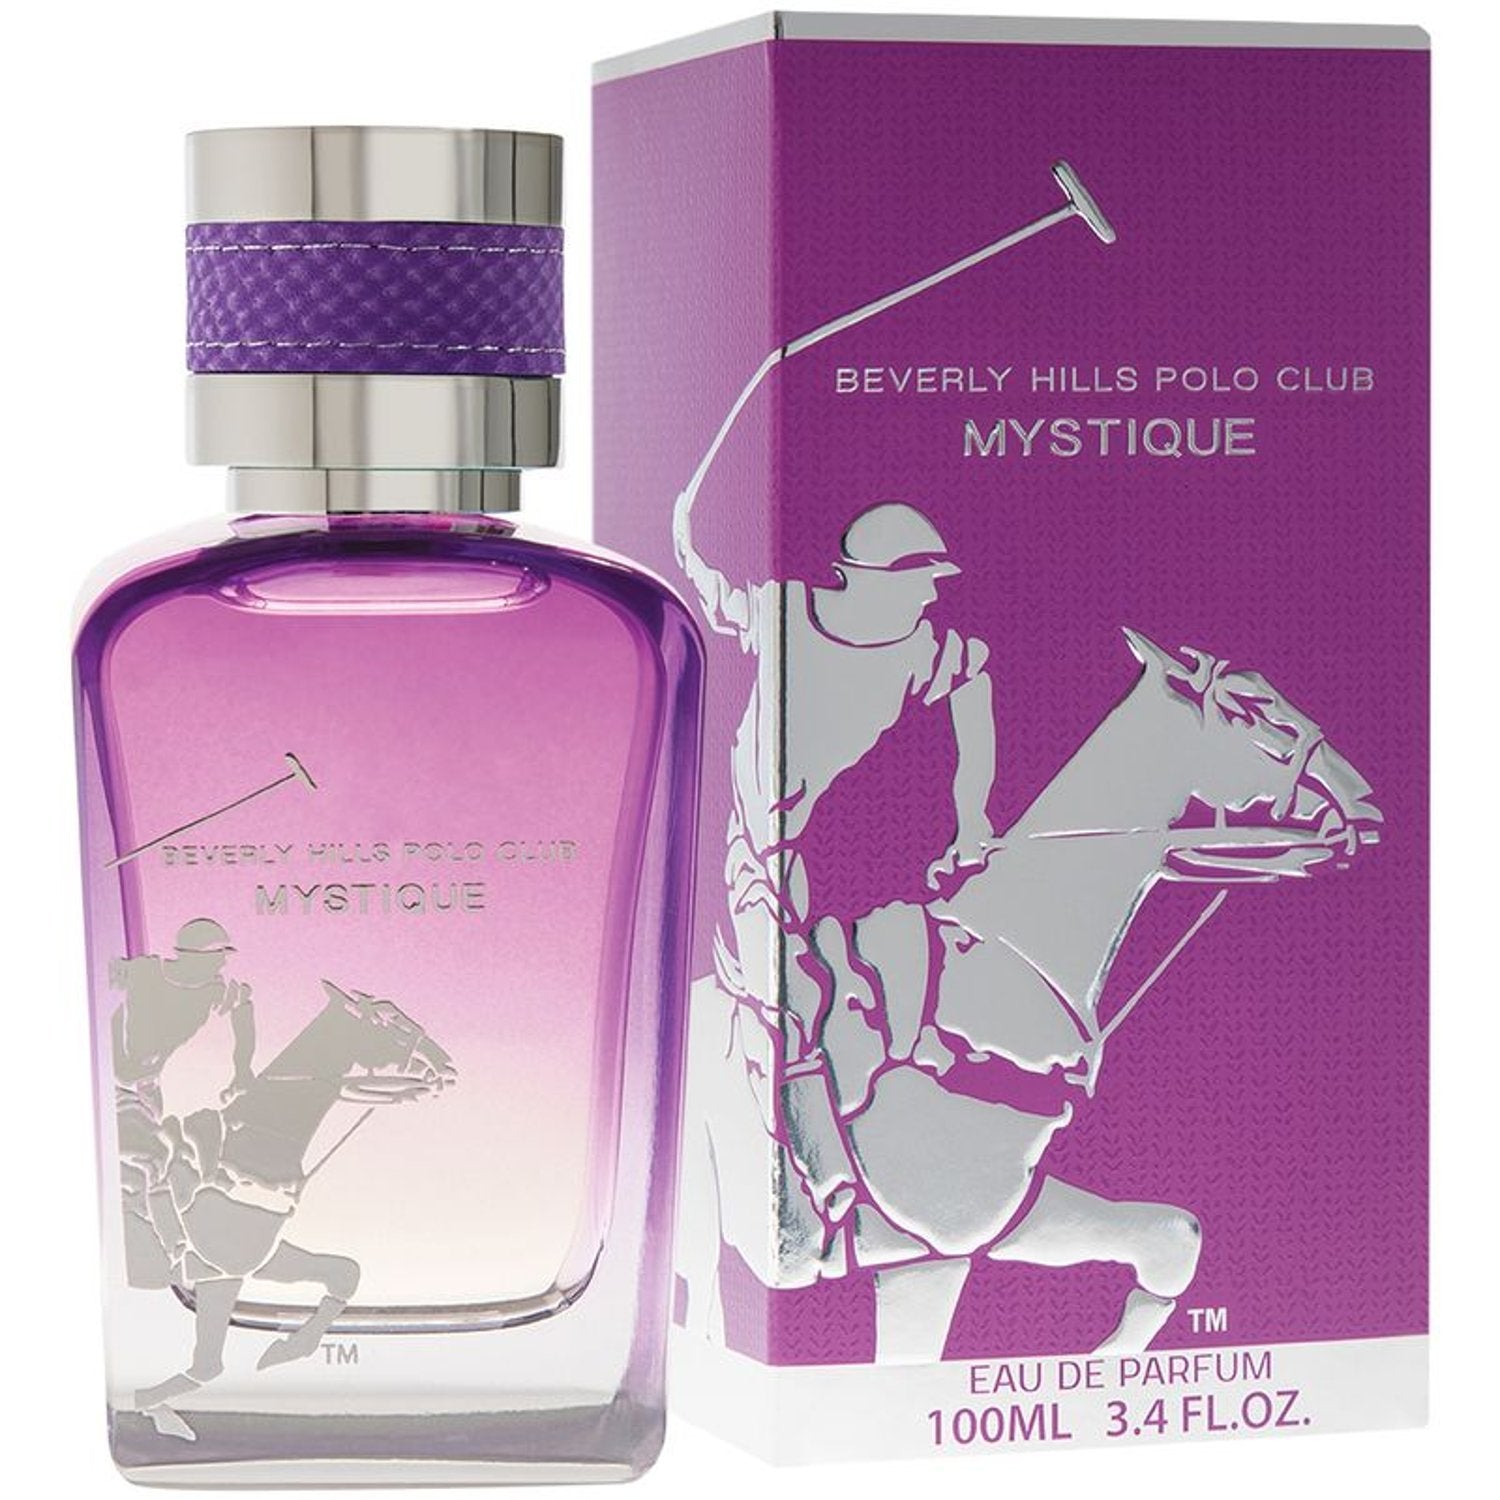 Beverly Hills Polo Club Mystique Perfume at Best Price - Halabh